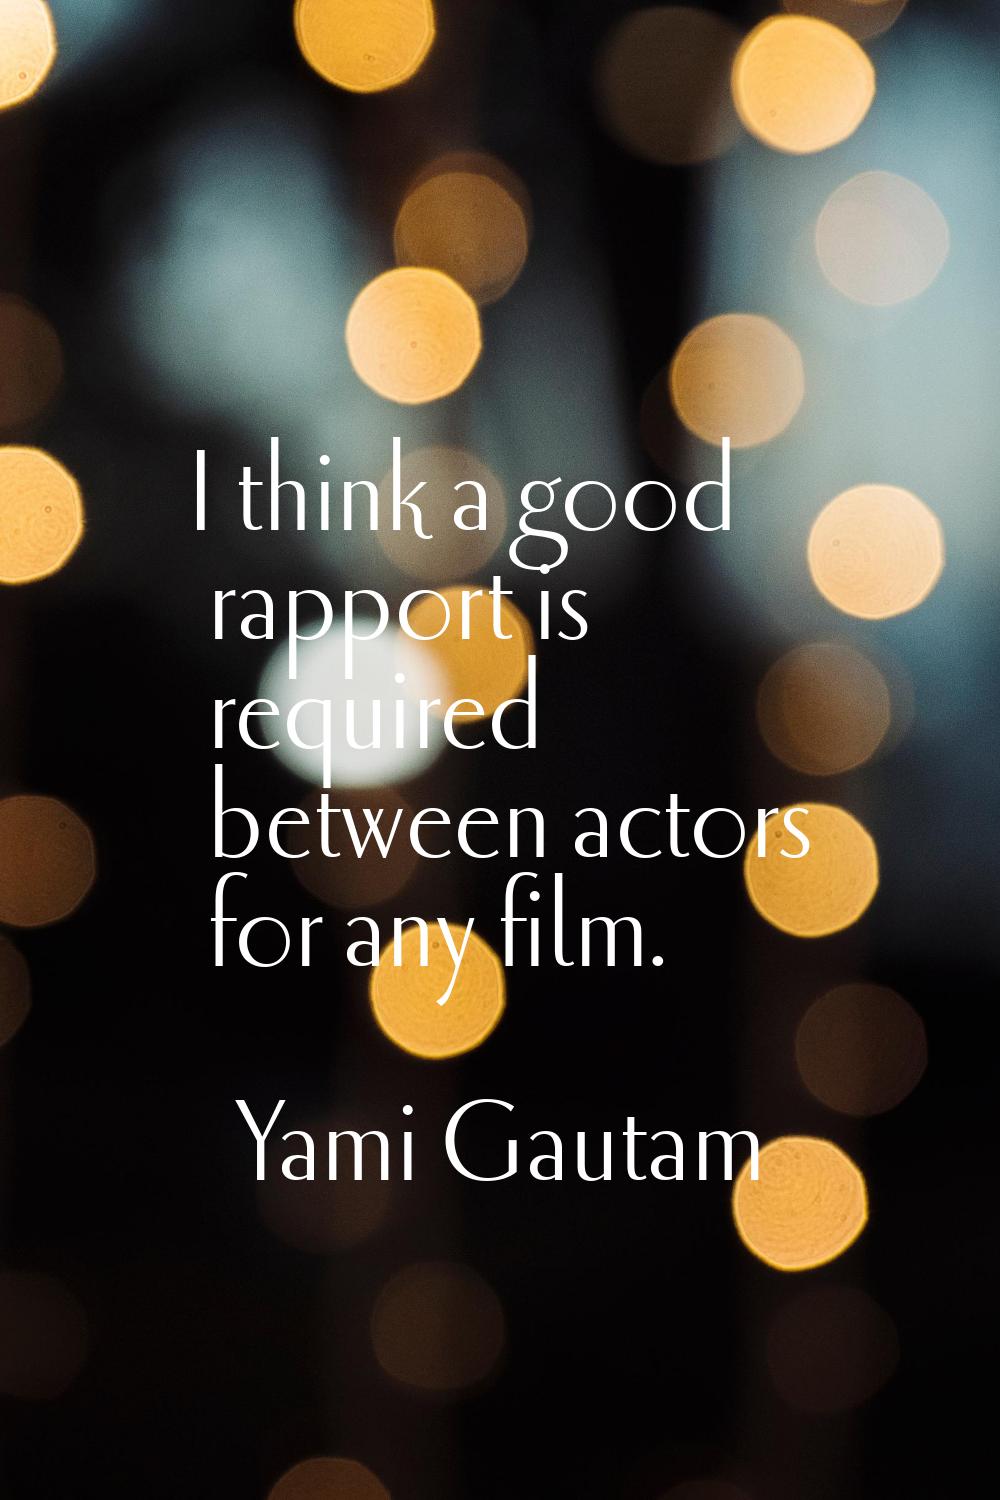 I think a good rapport is required between actors for any film.